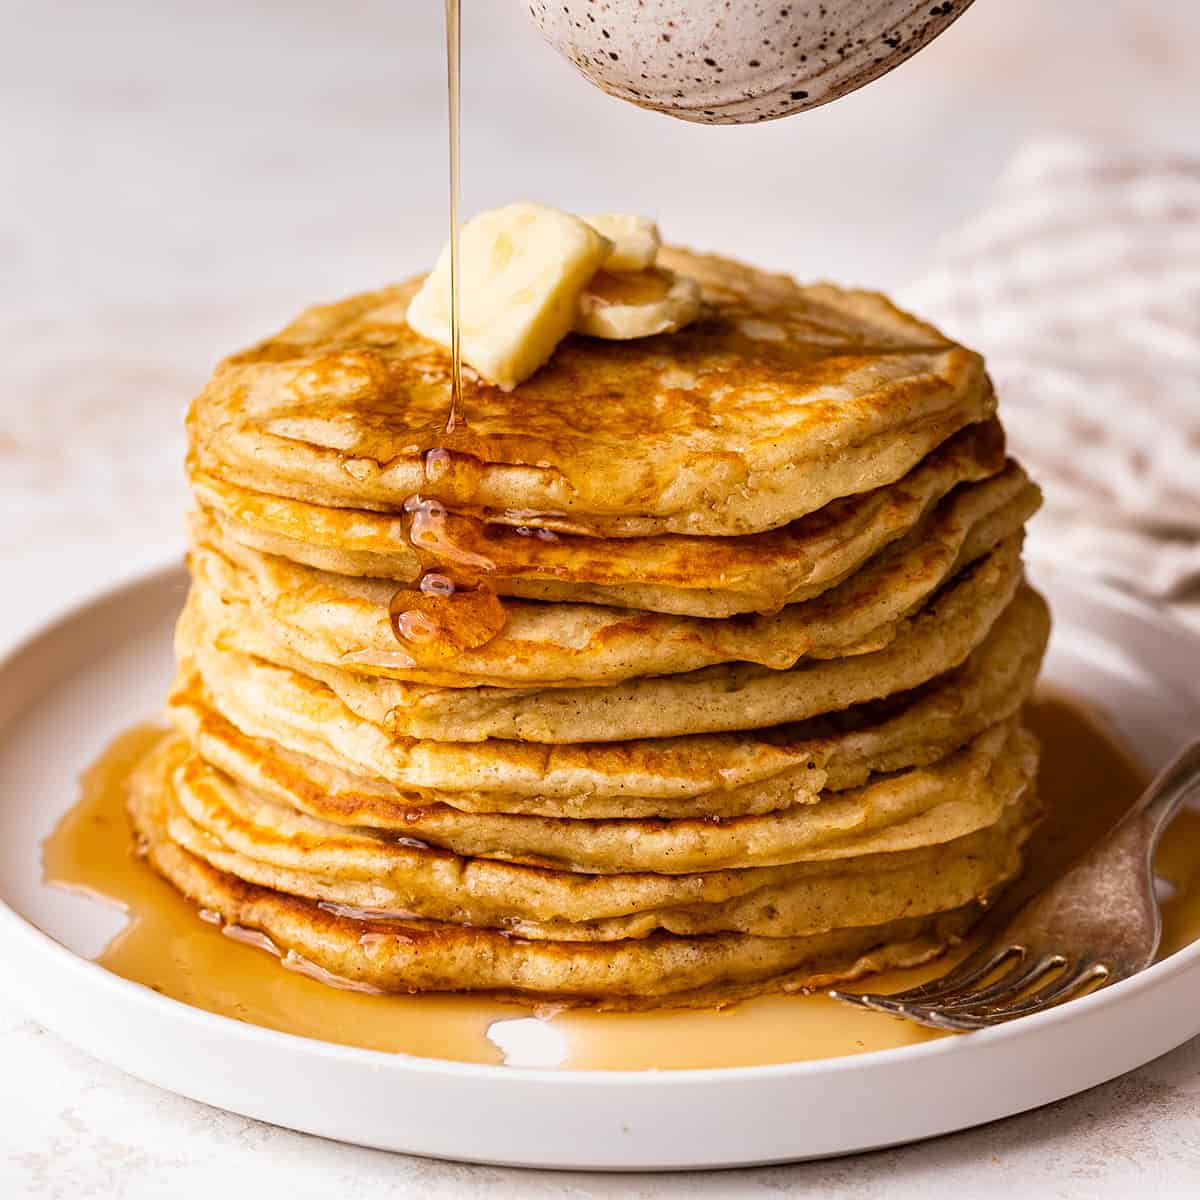 syrup being poured over a stack of 8 Buttermilk Pancakes